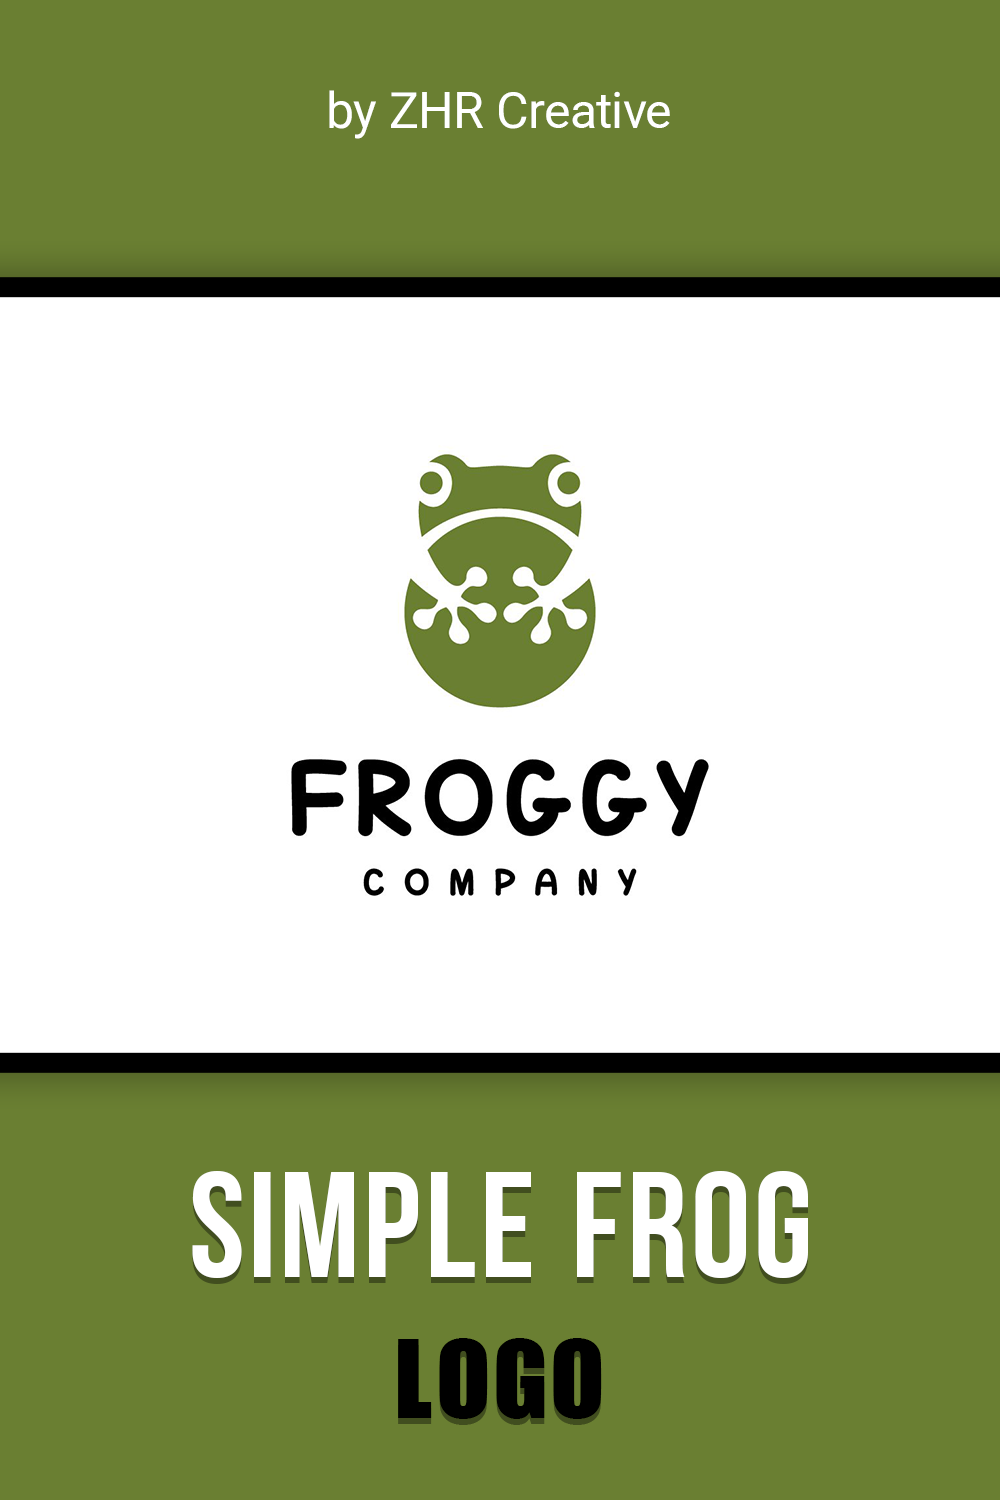 Simple green frog with ornament.